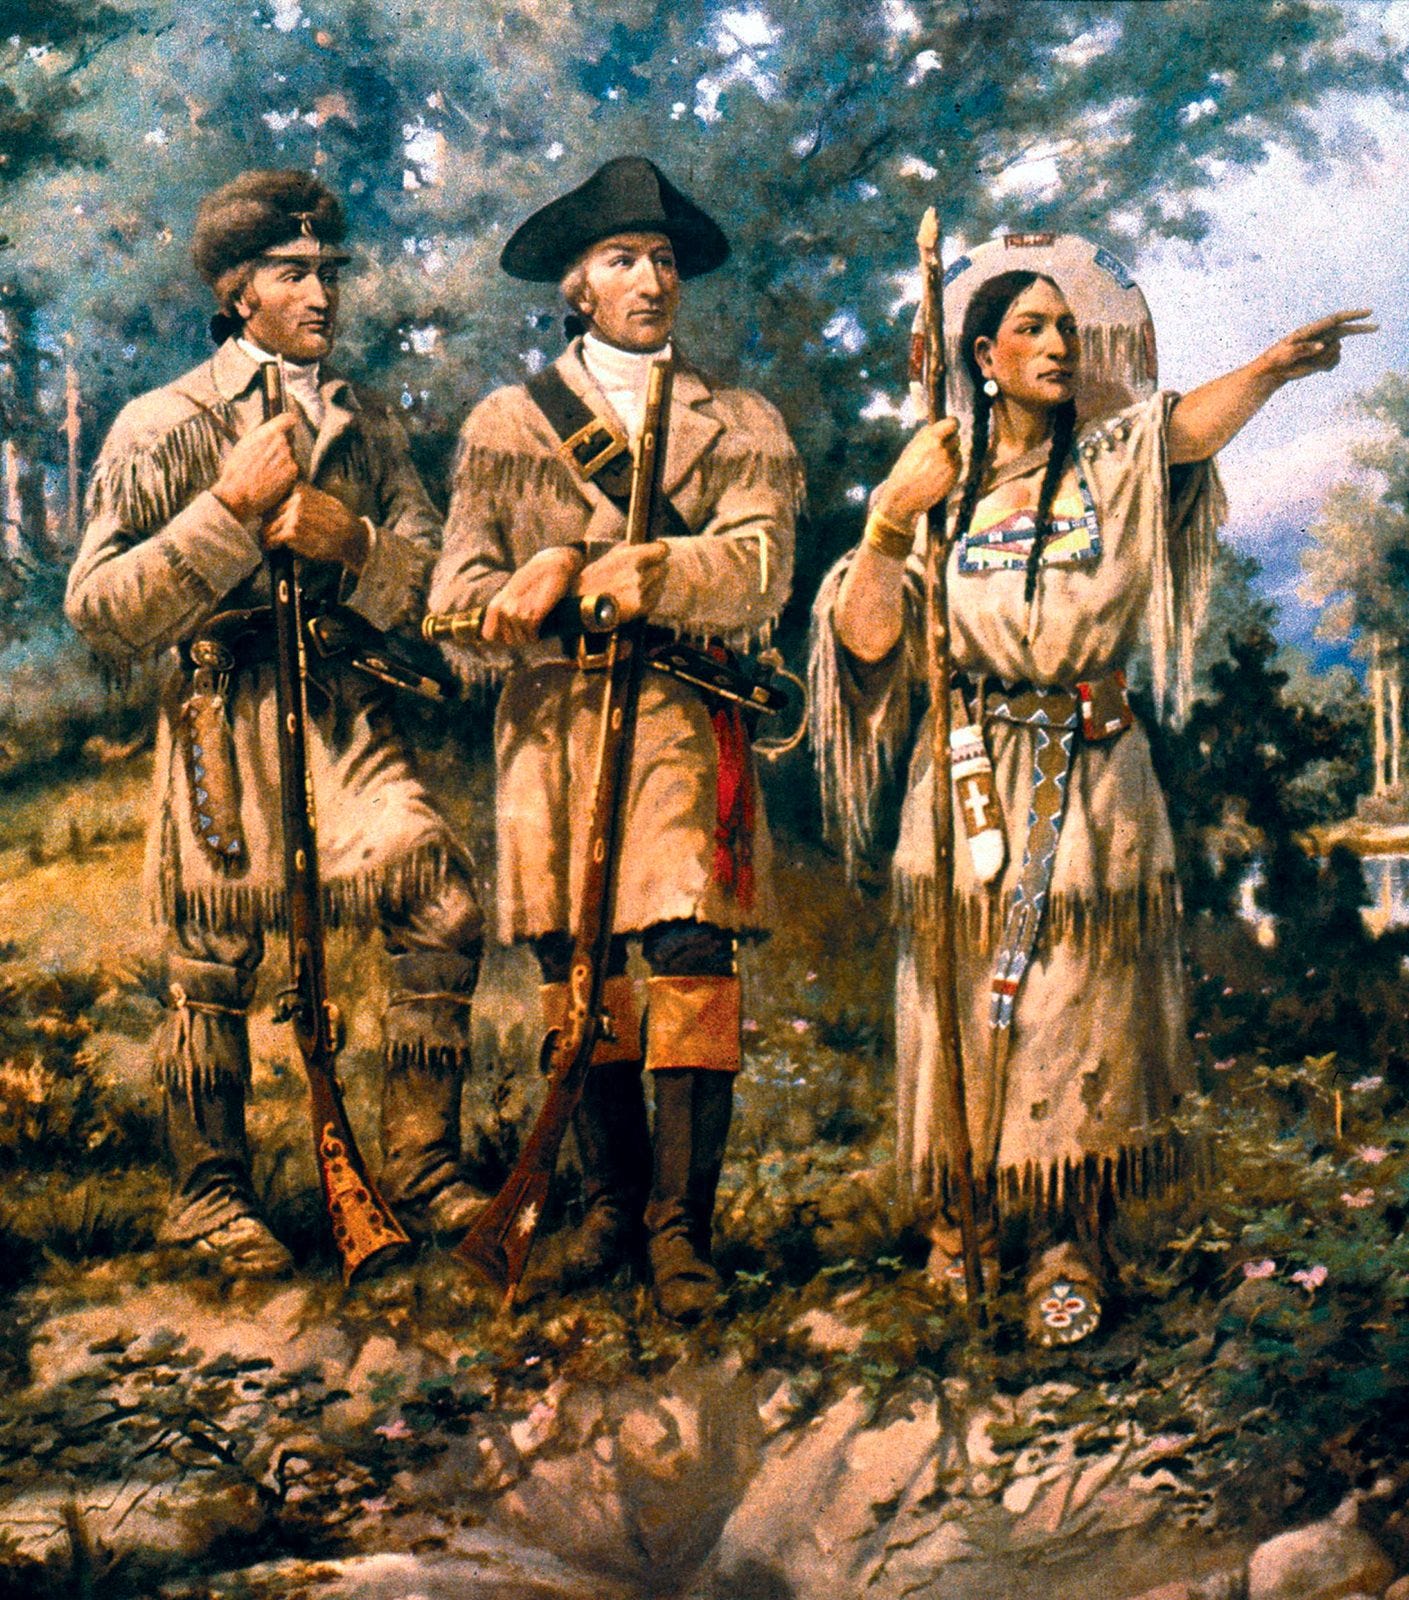 Lewis and Clark Expedition | Summary, History, Members, Facts, & Map |  Britannica